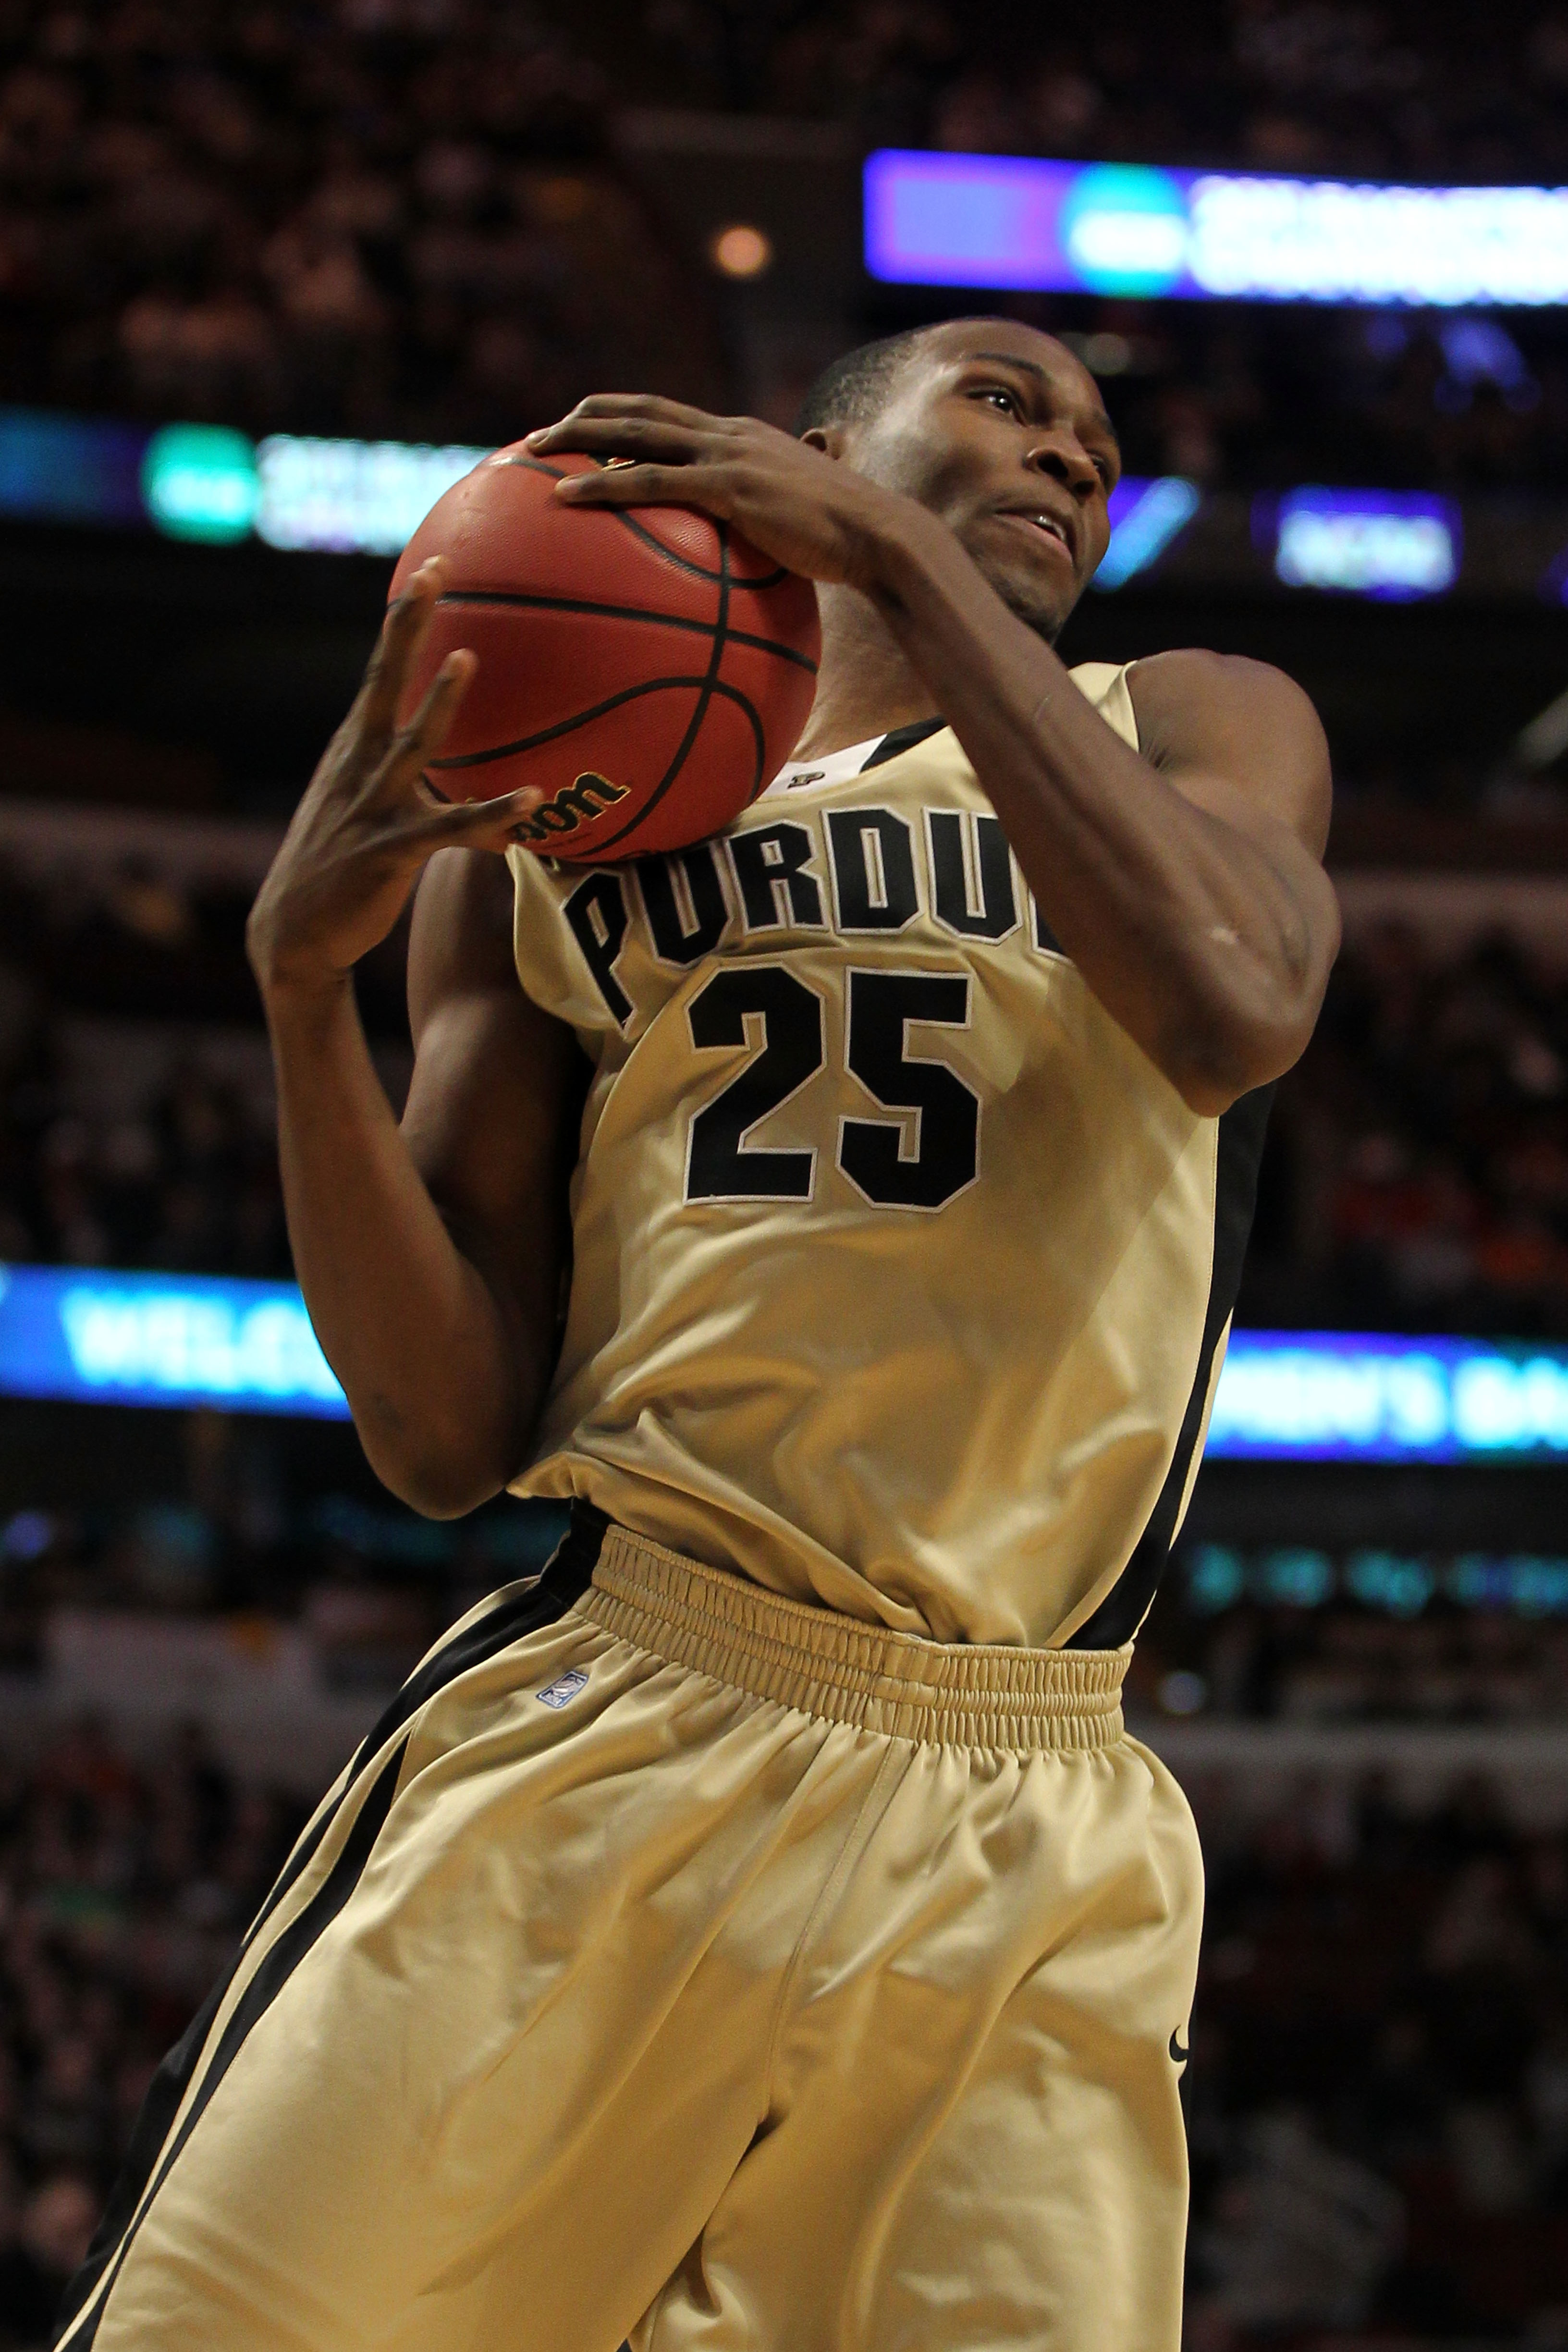 CHICAGO, IL - MARCH 20:  JaJuan Johnson #25 of the Purdue Boilermakers rebounds against the Virginia Commonwealth Rams n the first half during the third round of the 2011 NCAA men's basketball tournament at the United Center on March 20, 2011 in Chicago,